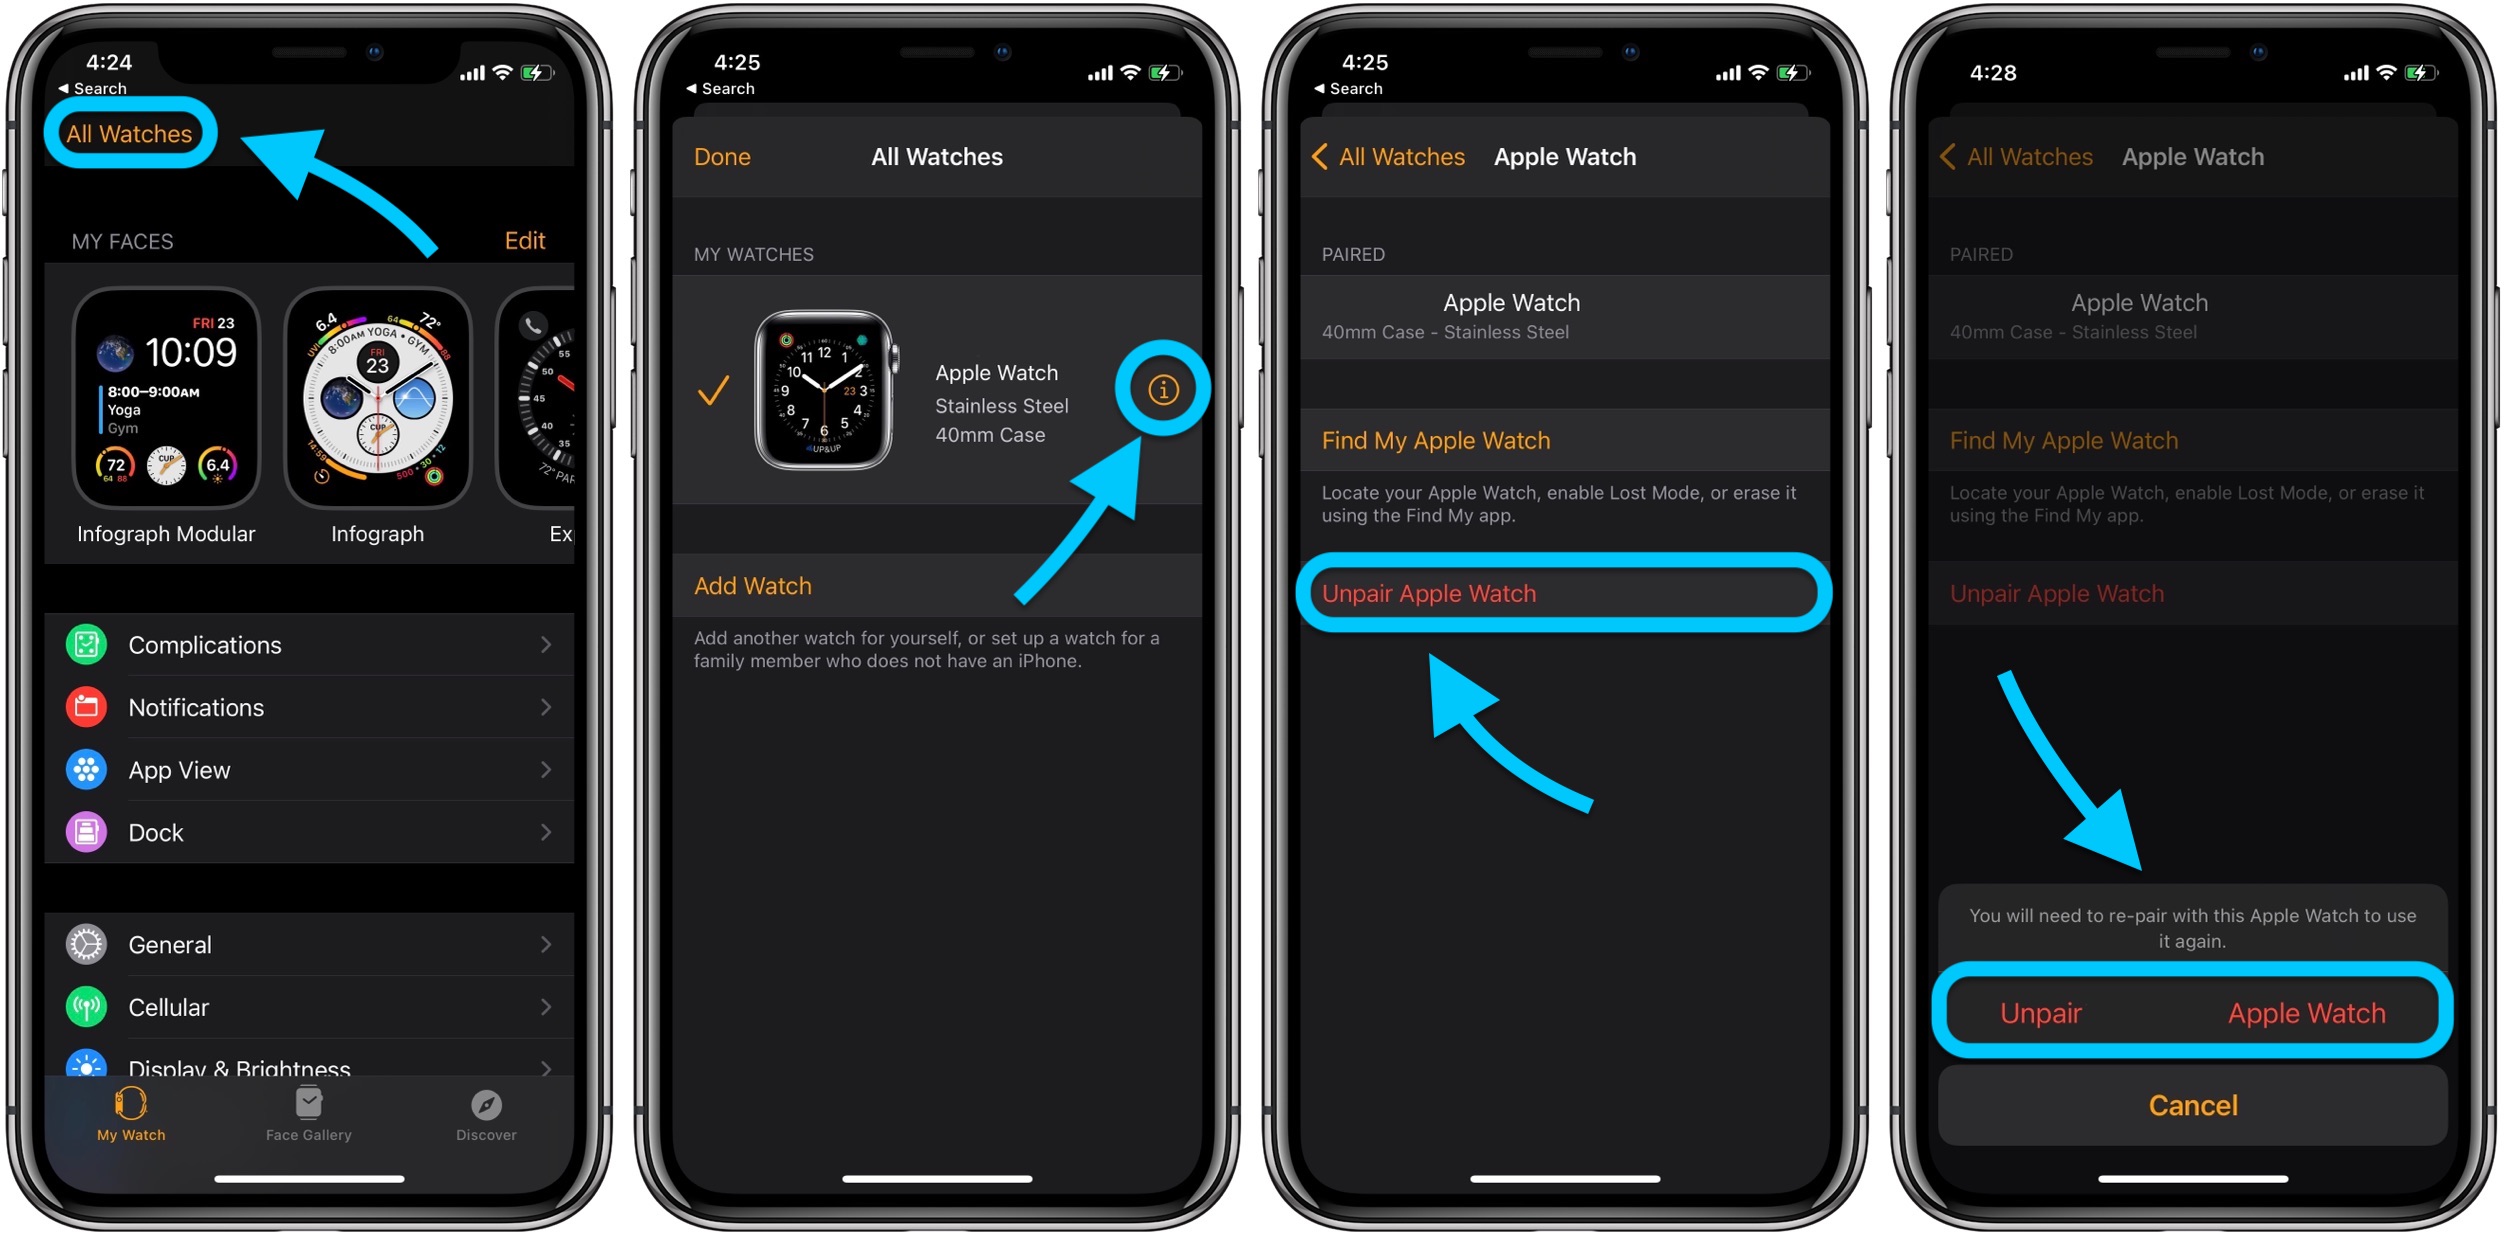 How to upgrade to Apple Watch Series 6 without losing data